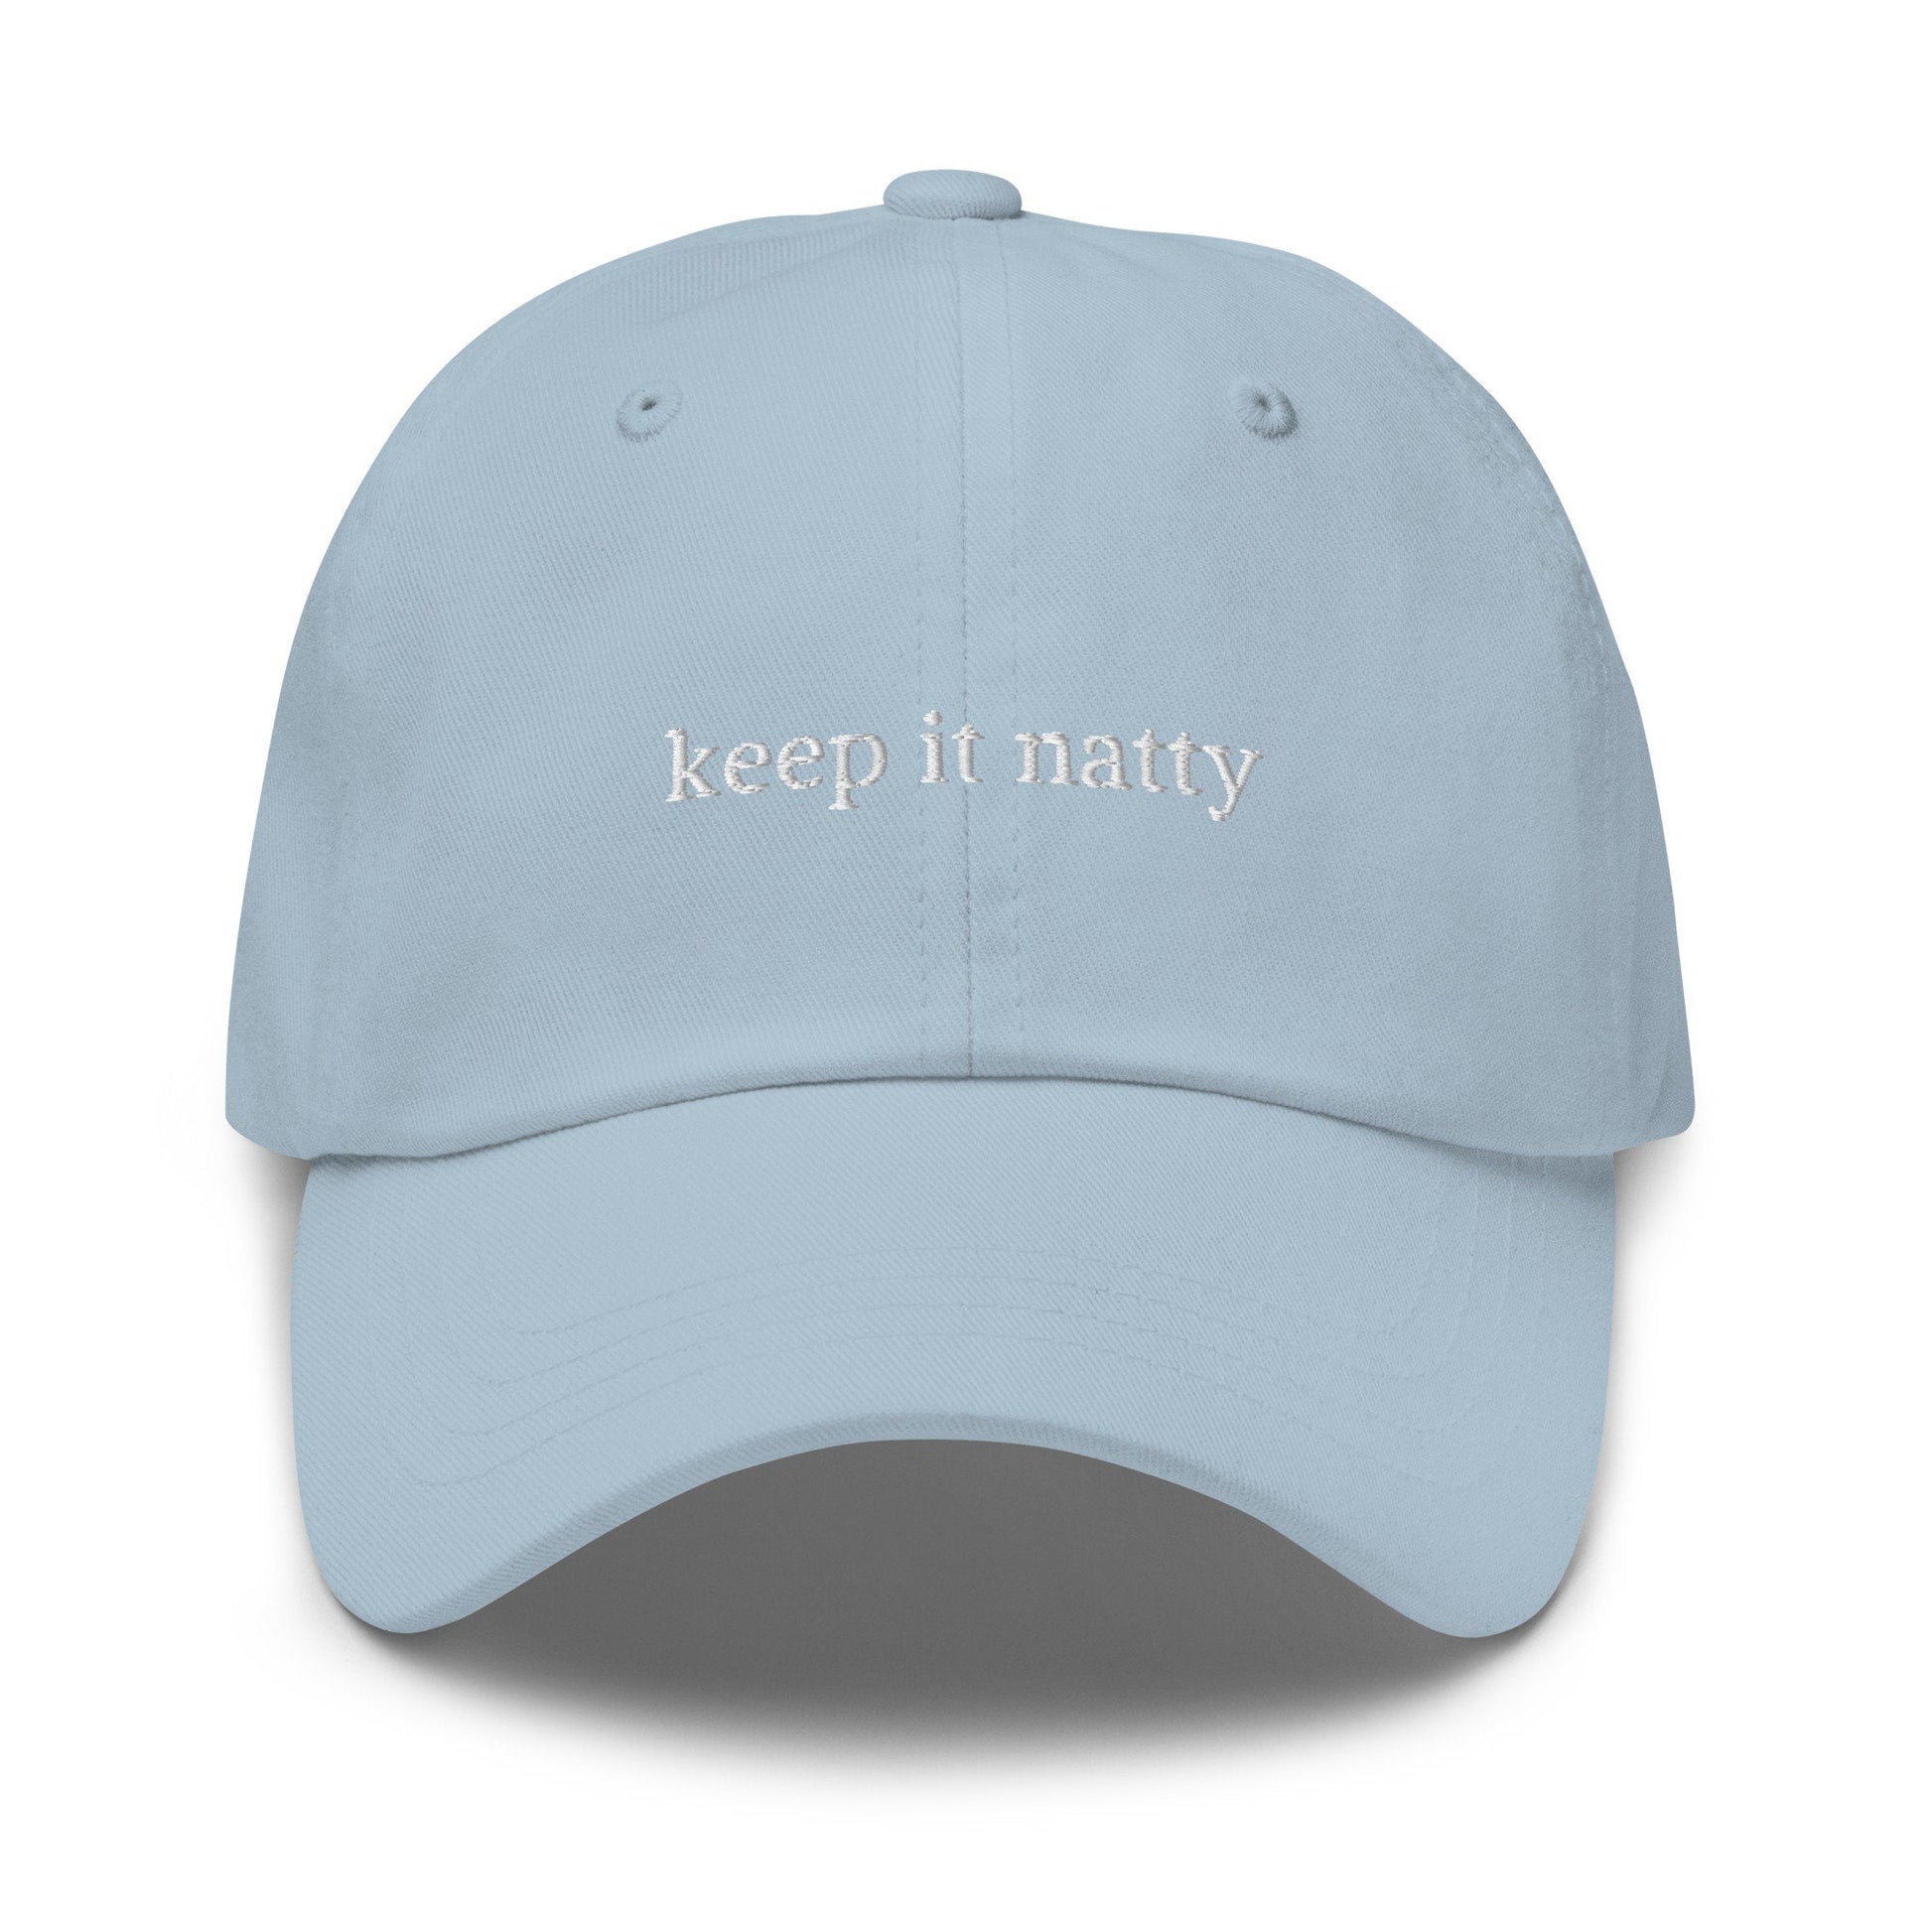 Natural Wine Hat - Keep it Natty - Handmade Embroidered Cotton Cap